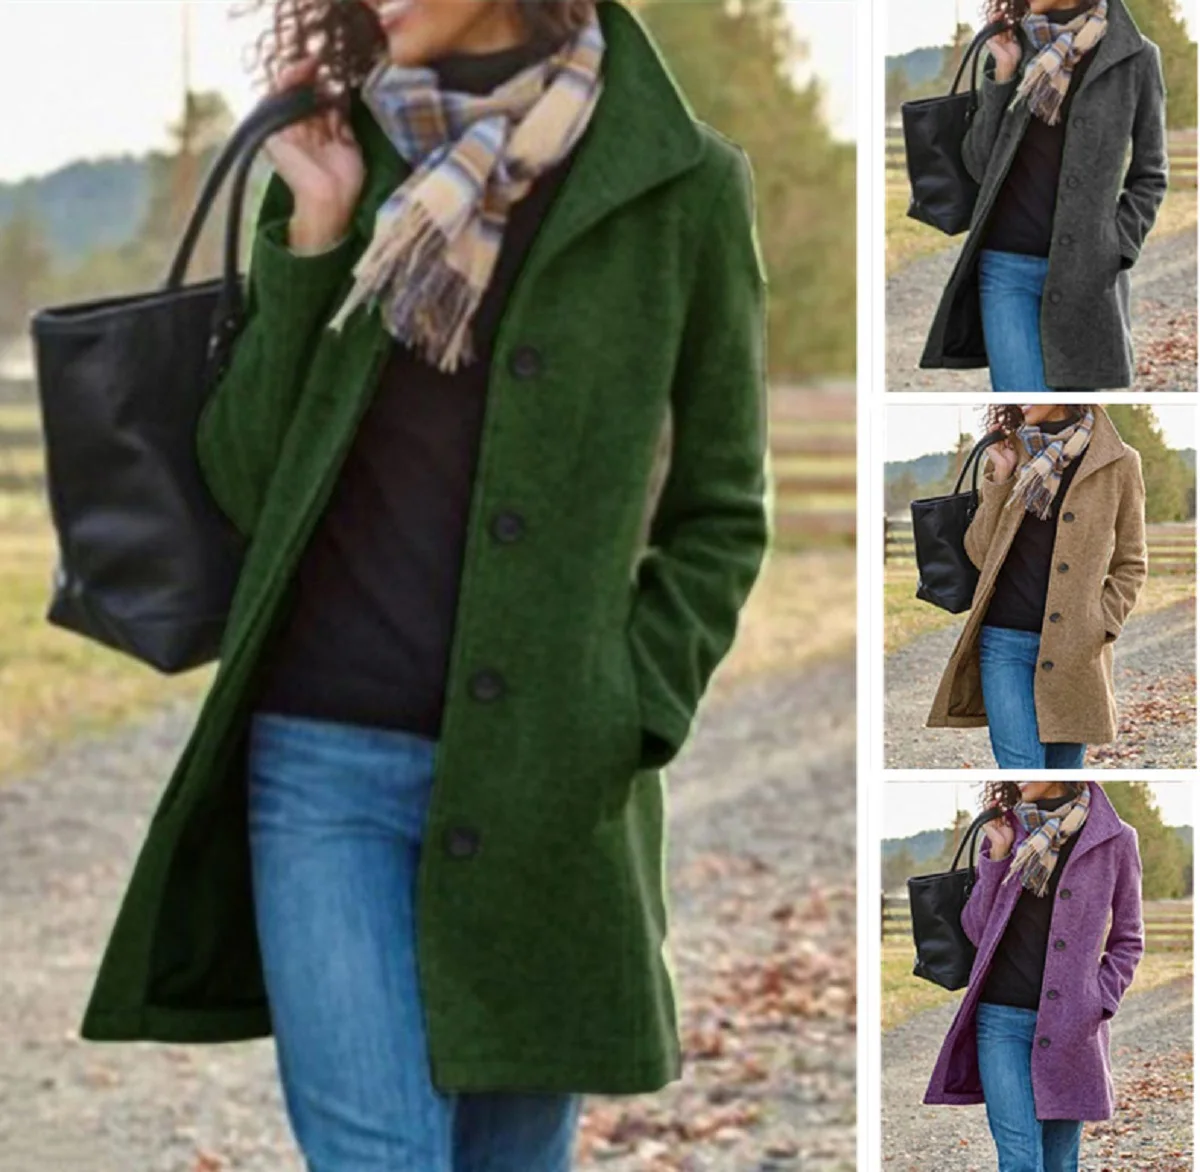 Autumn Winter Loose Maternity Thick Long Trench Coat Jacket Top Causal Women Single-Breasted Woolen Outwear Coat Capes Plus Size men overcoat winter single breasted jacket fashion solid color trench coat long sleeve woolen blend outwear windbreaker